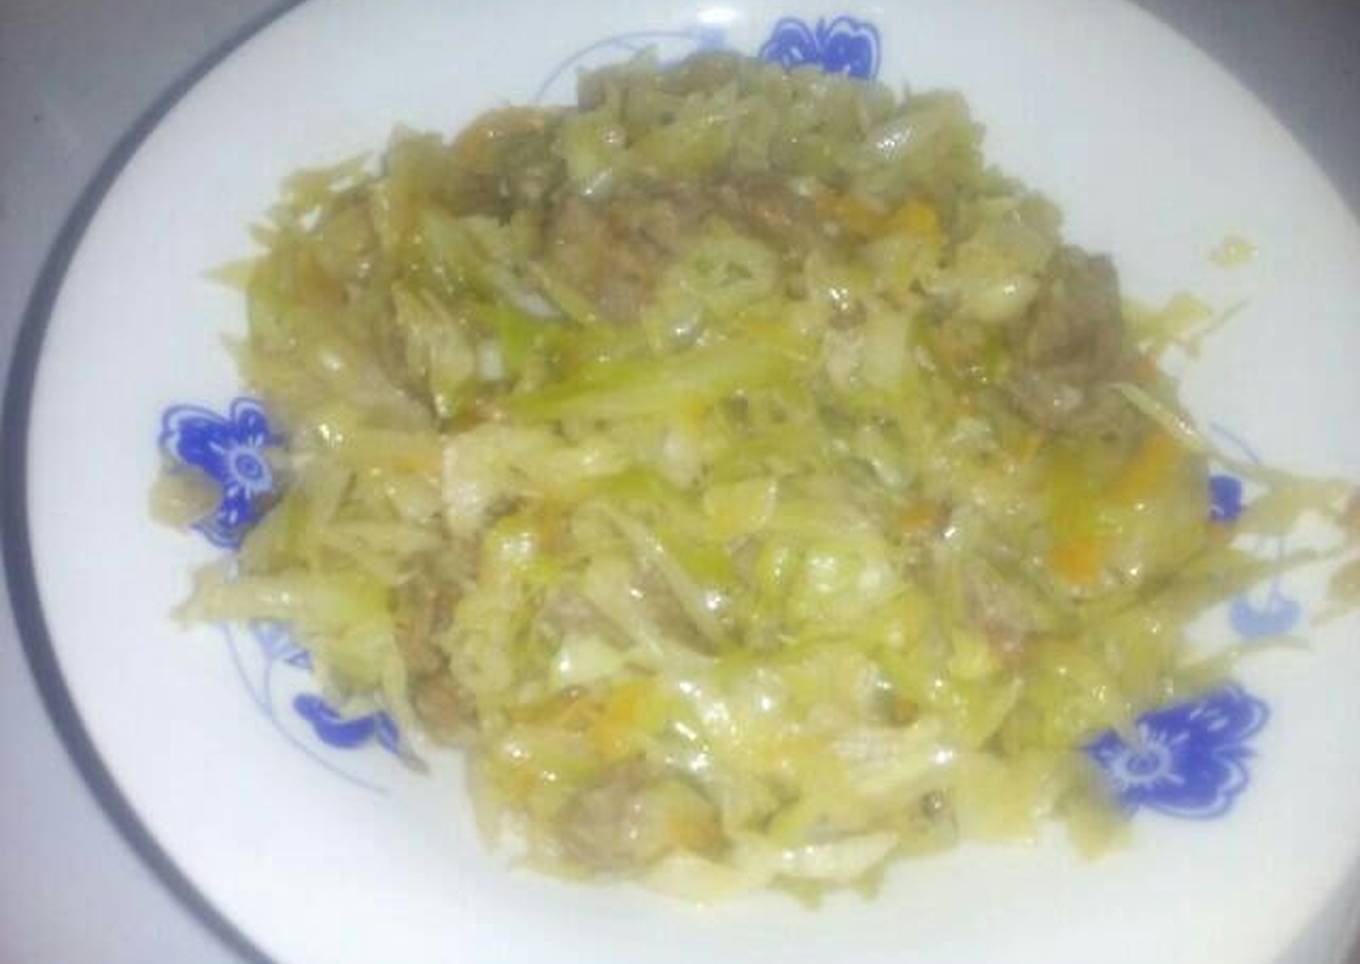 mix cabbage and beef